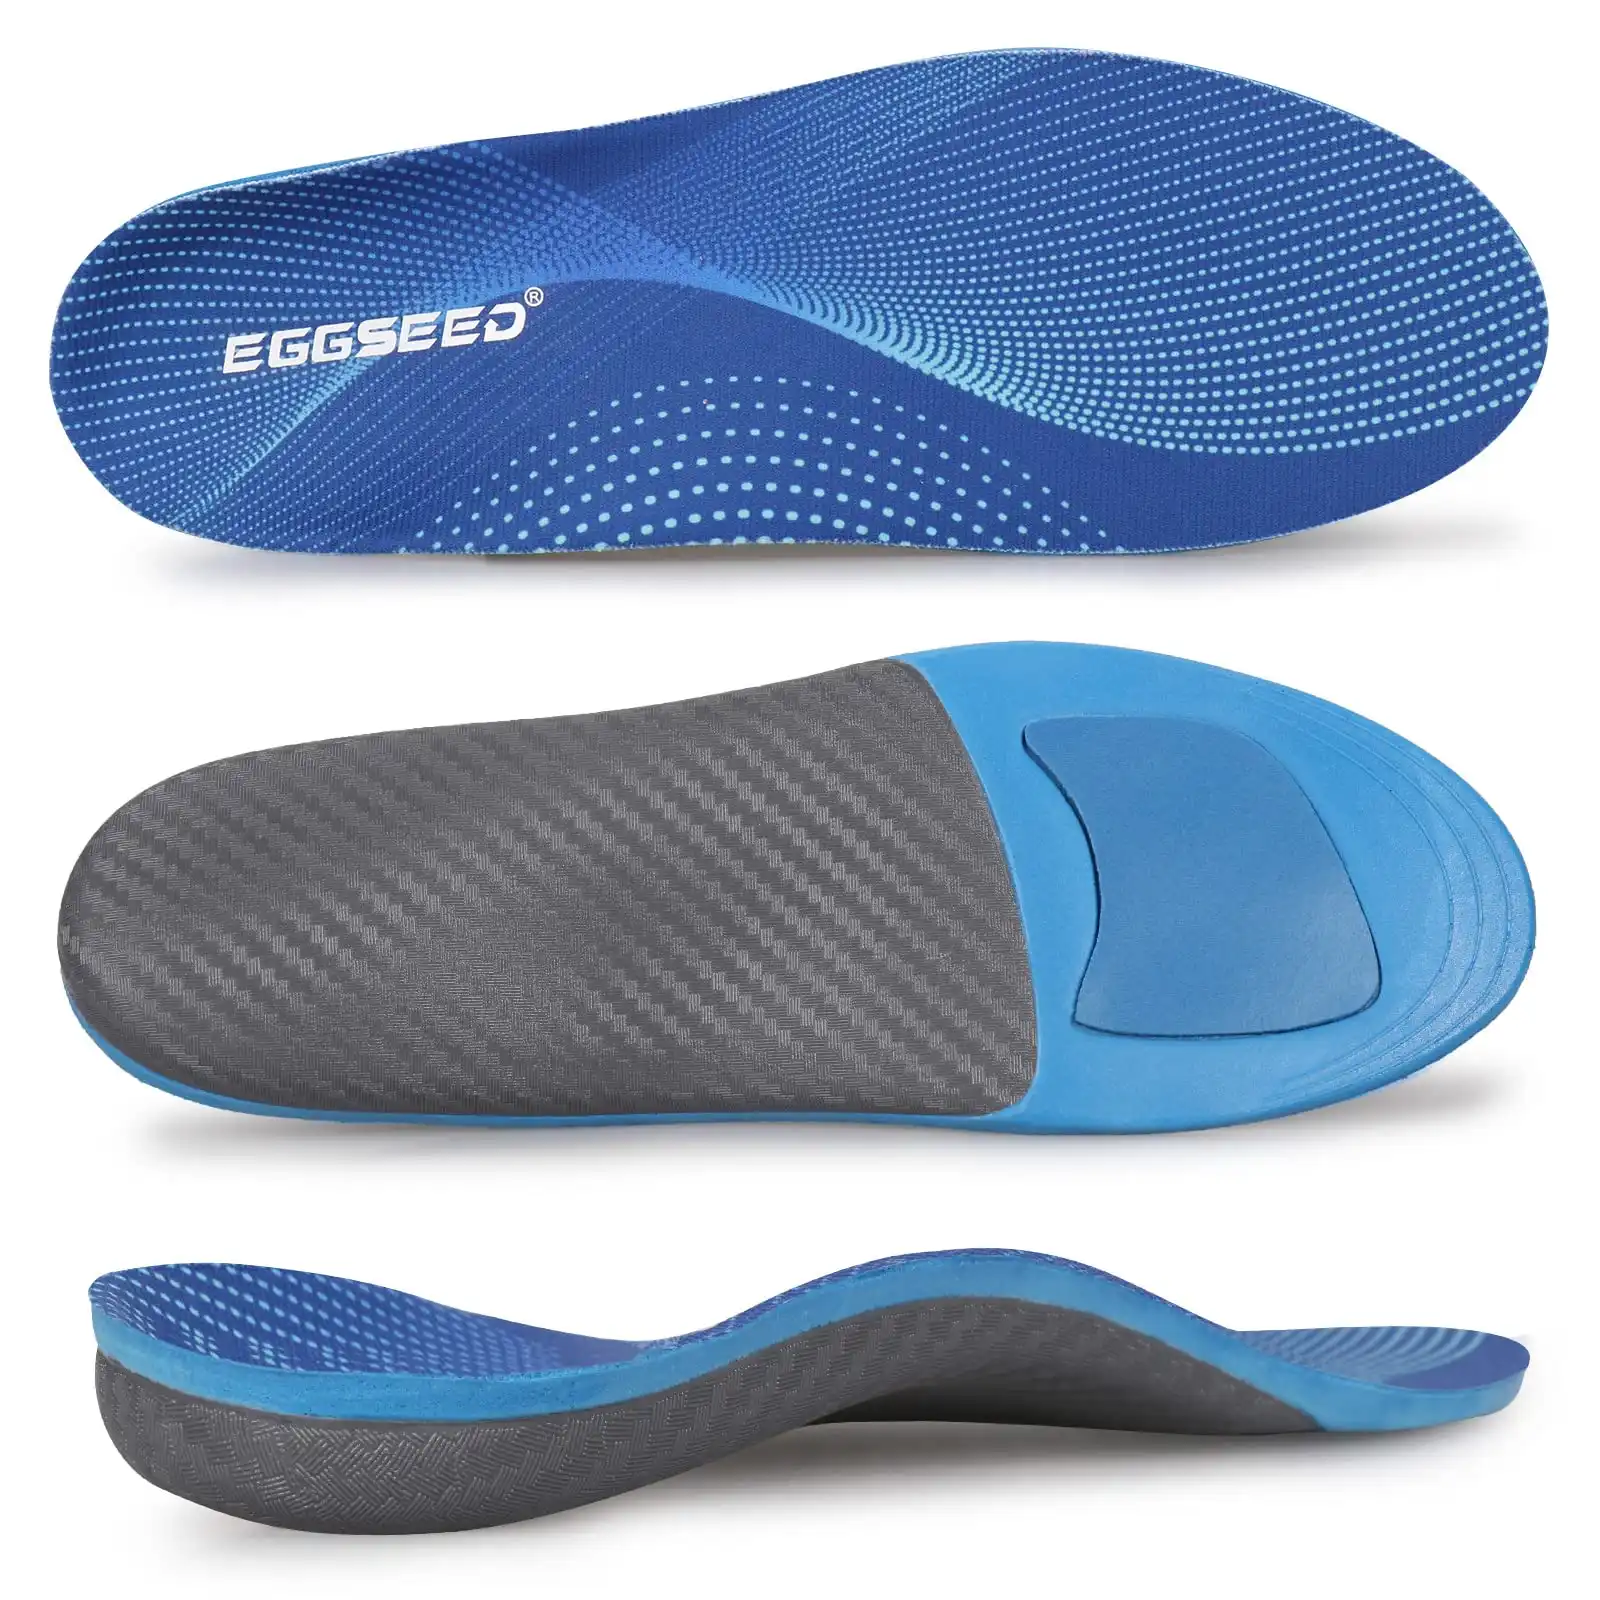 Best Insoles for Teachers -egg seed inserts